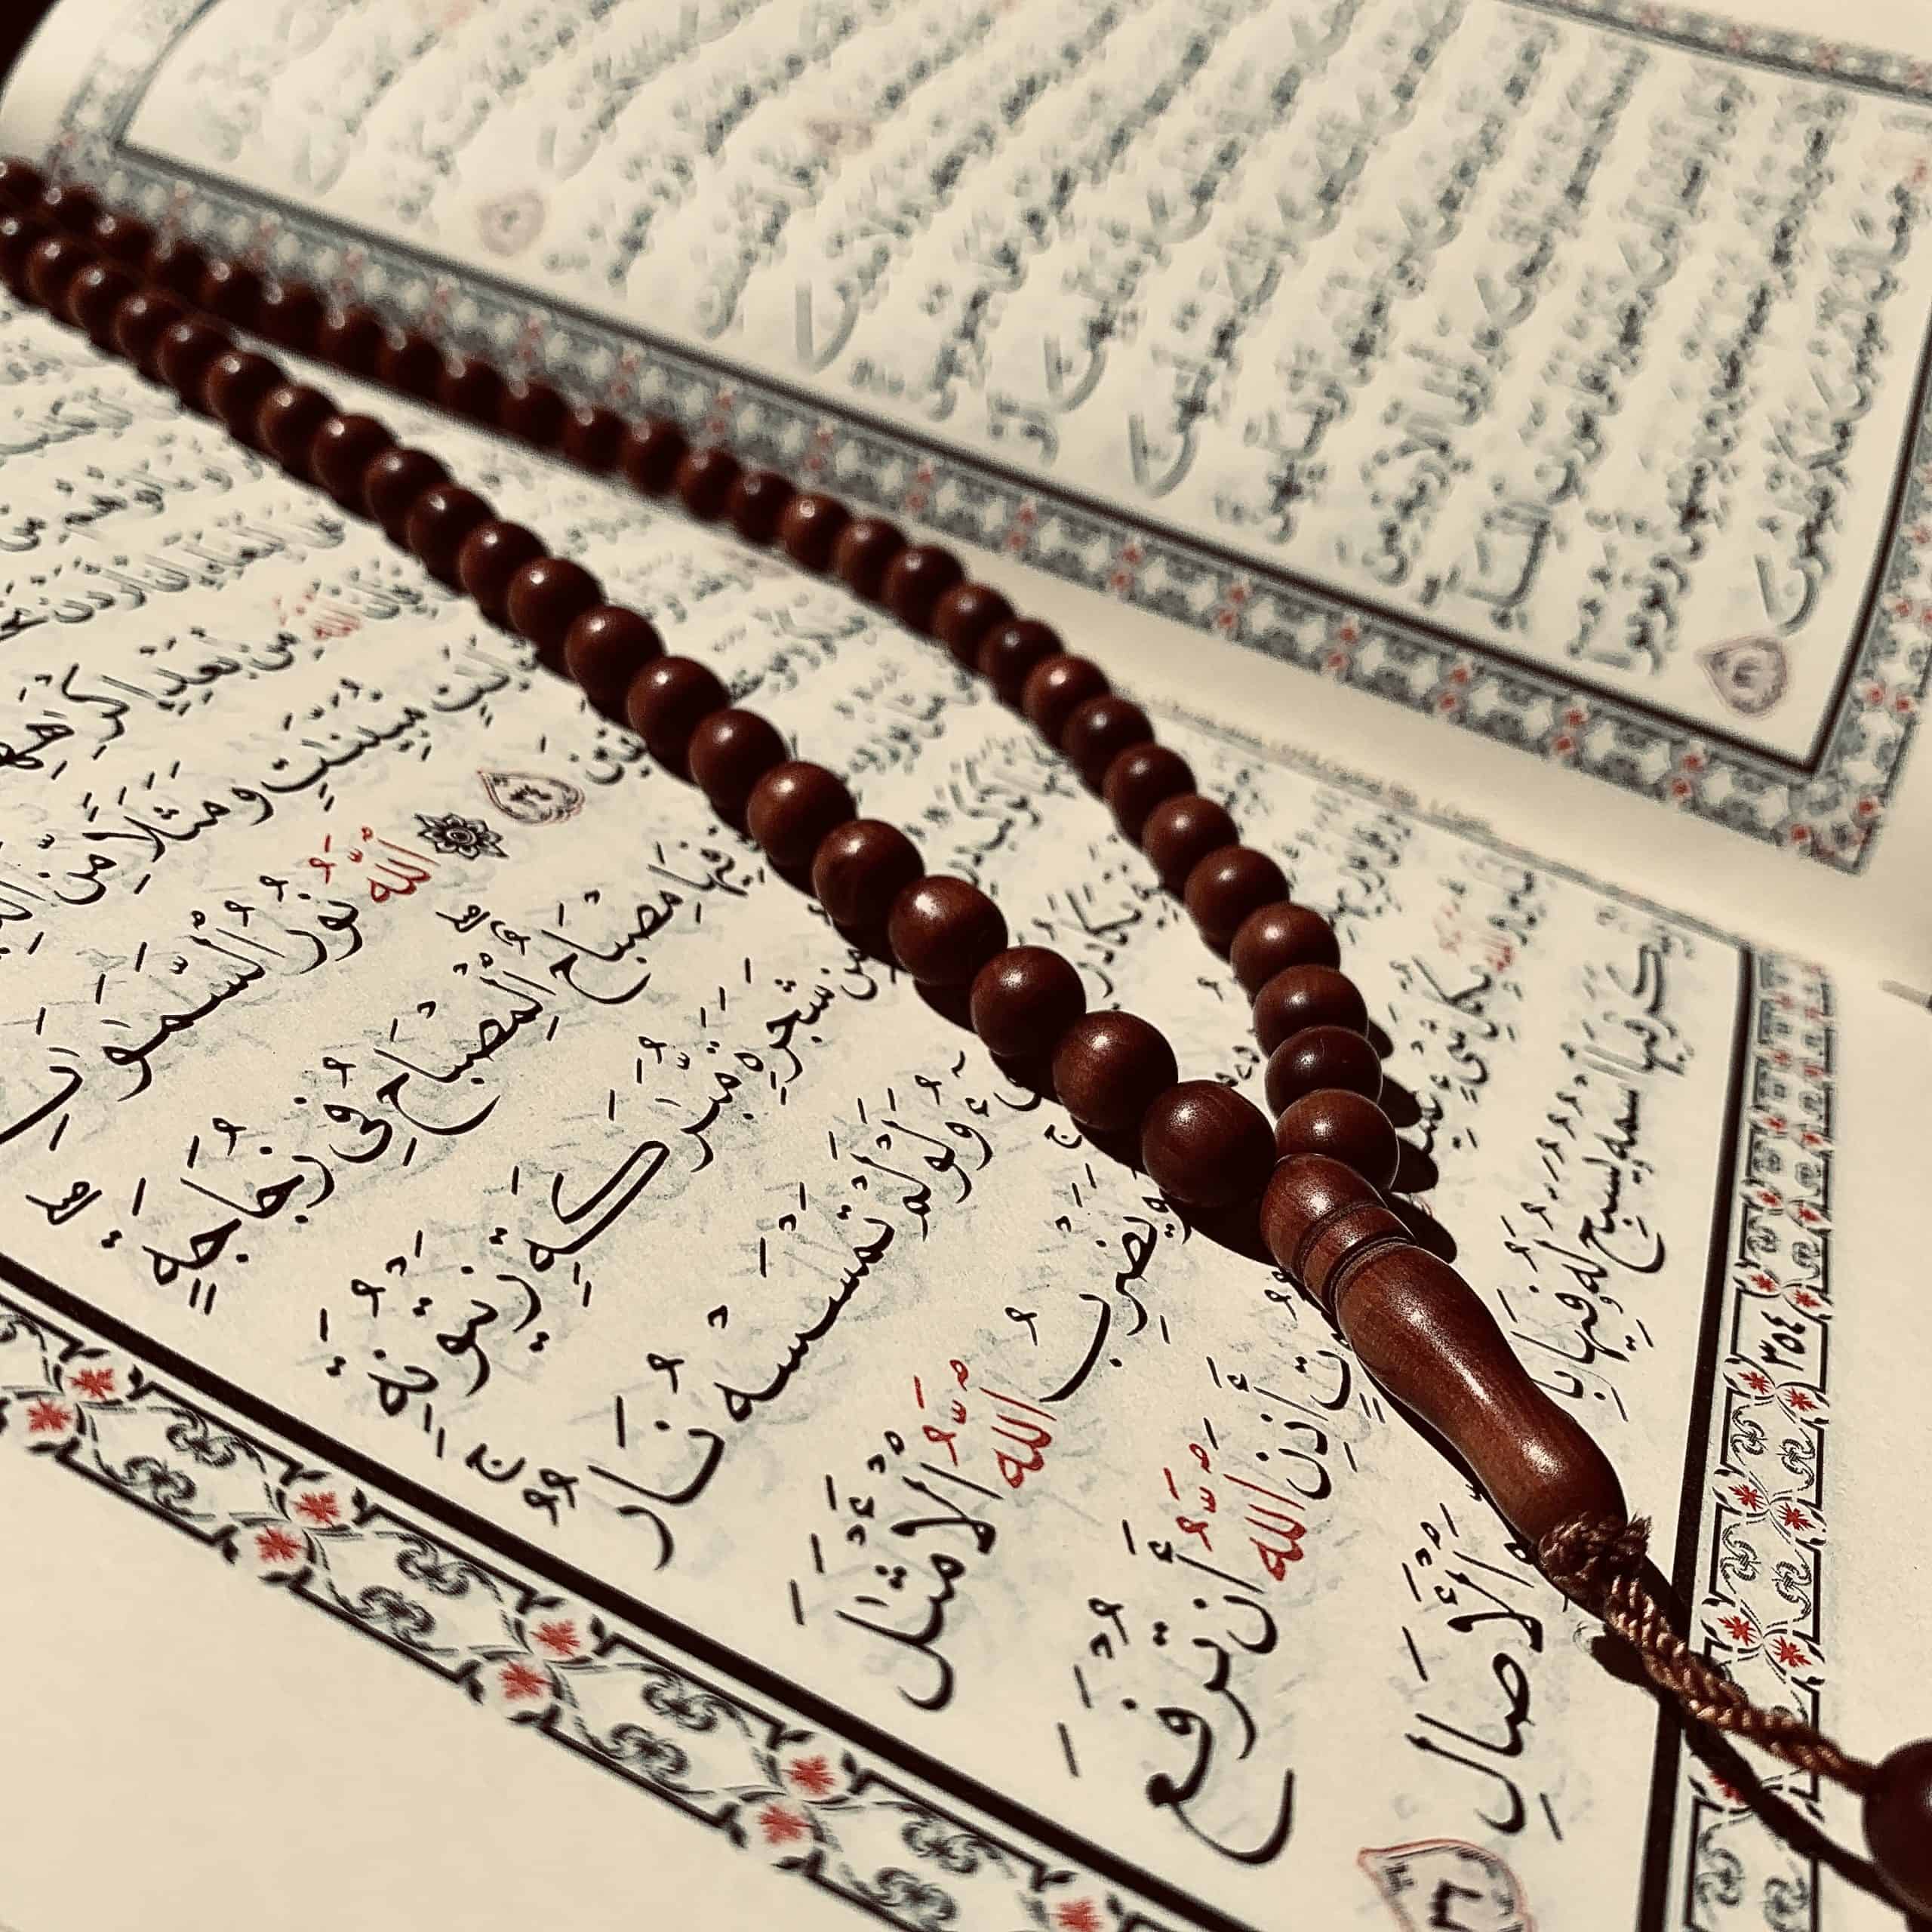 can a woman recite the quran on her period?